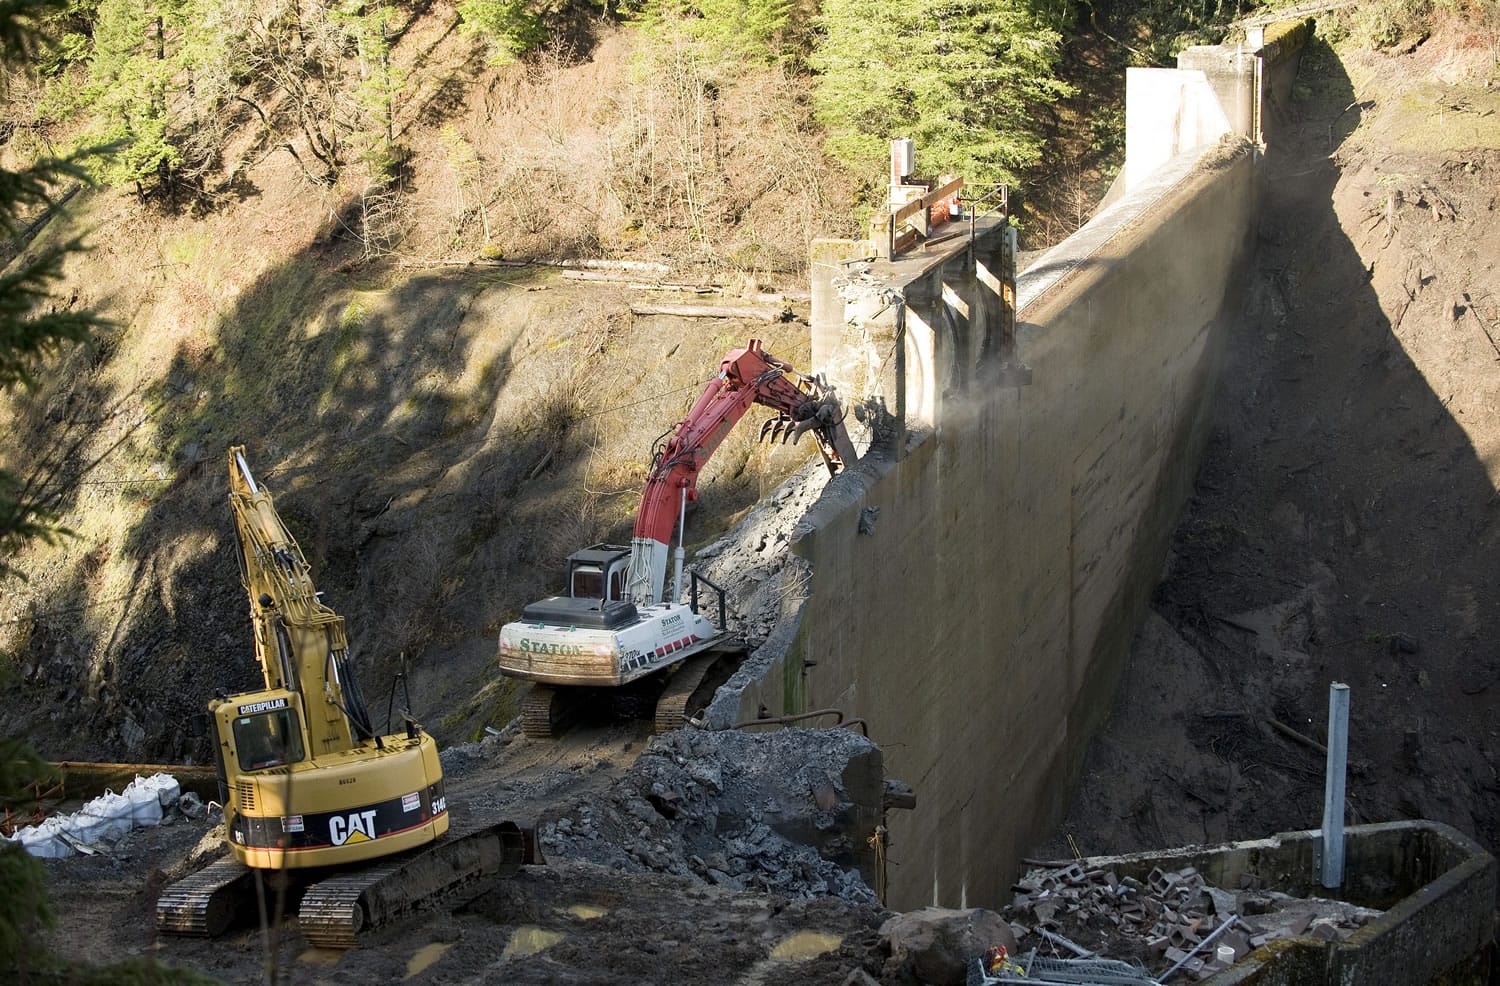 Photos by Steven Lane/The Columbian
The process of removing Condit Dam continued Friday as crews used heavy machinery to chip away at the concrete structure.  Top: Crews use heavy machinery to move sediment built up over a century into the White Salmon River, speeding the flushing process and stabilizing the bank.